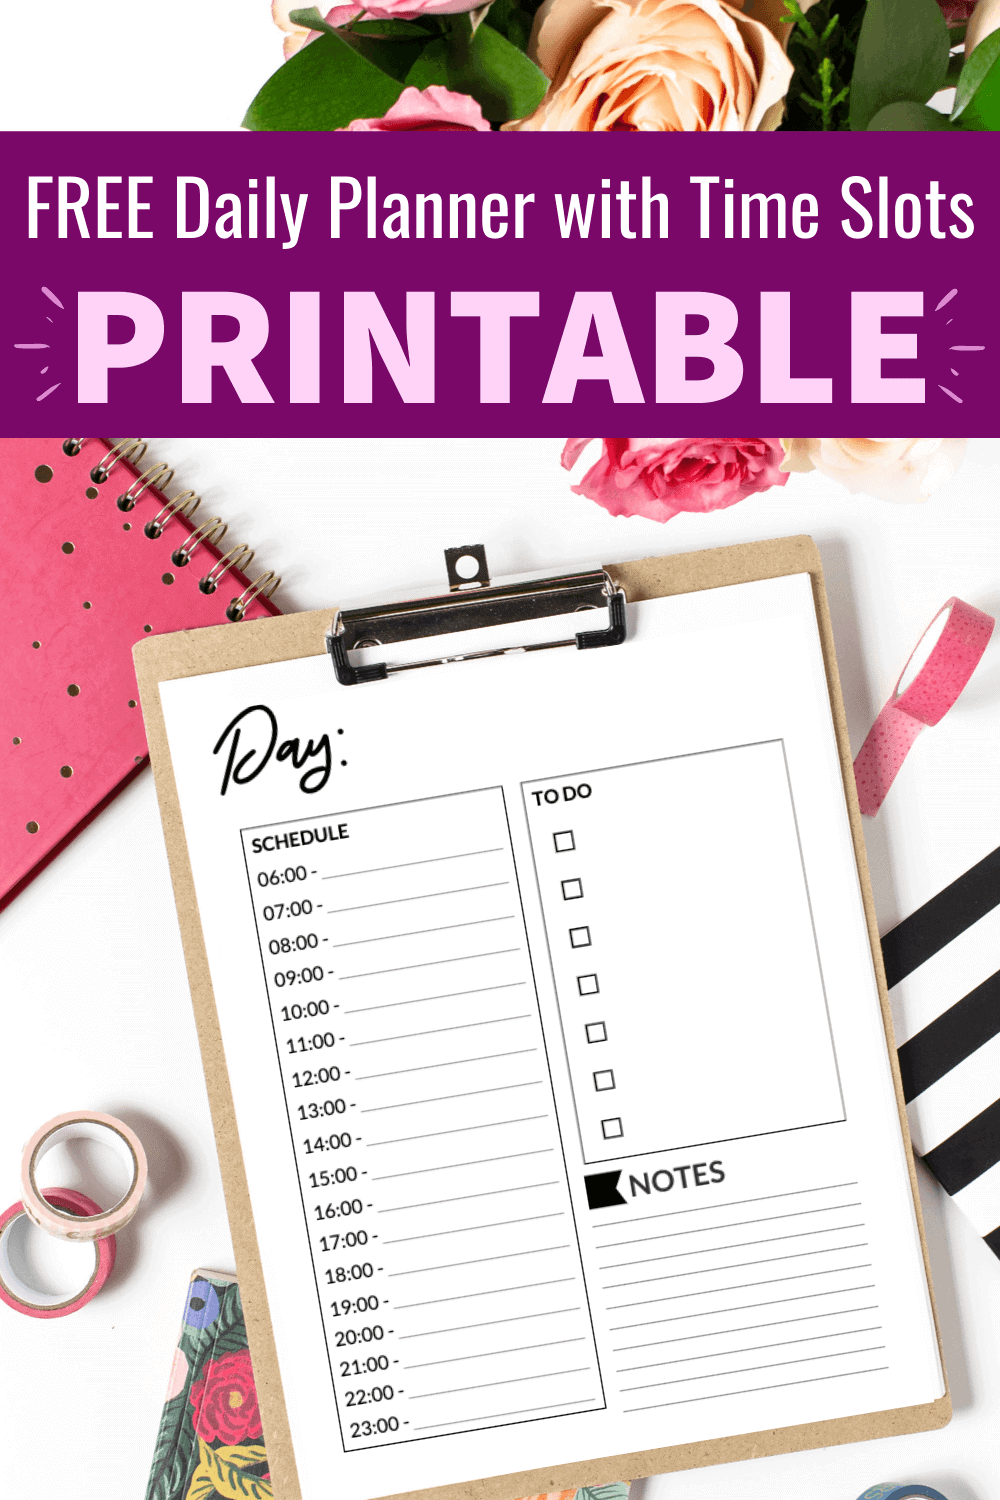 Stuck at home and ready to get organized and ace your time management? Then you need this simple and cute daily planner template. Daily planner printables + free templates = time management win! So grab your daily planner printables free PDF and get alll the things done. This is the best daily planner printables free hourly and will be a winner for your productivity. Grab your daily schedule printable free time management now! #planner #timemanagement #freeprintables #getorganized